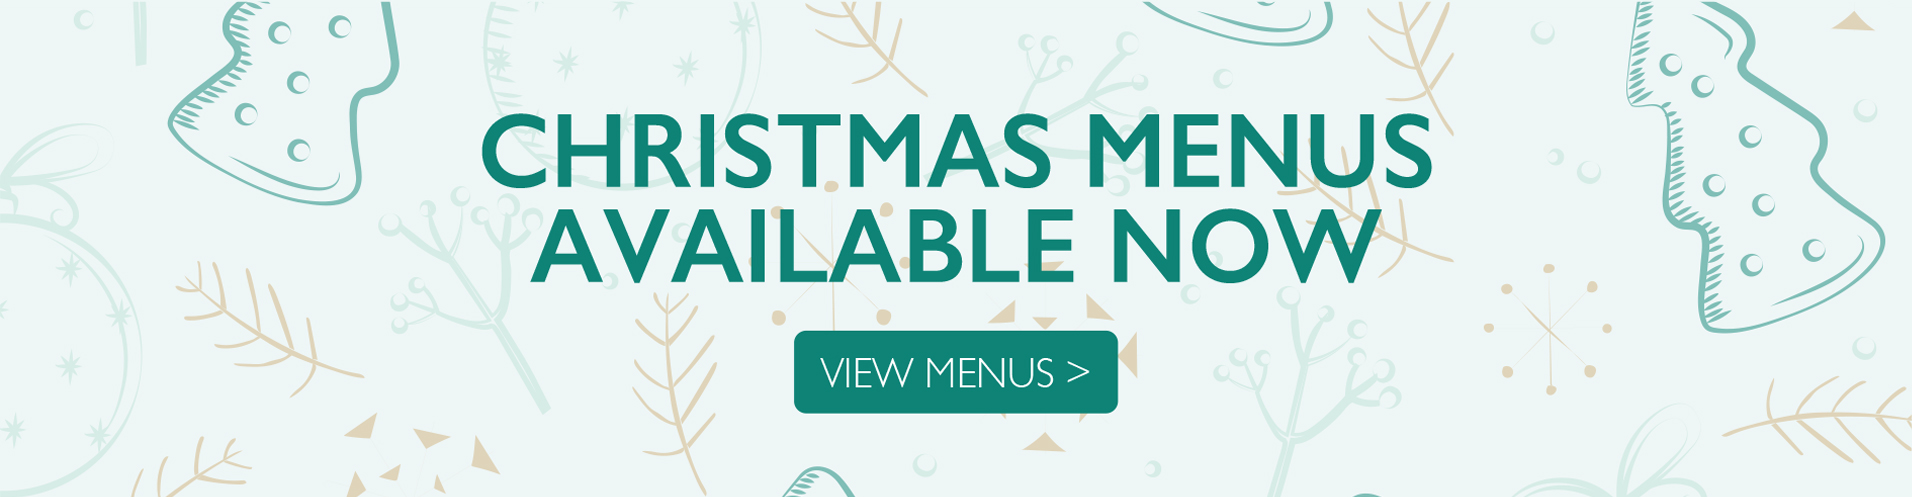 Christmas menus now available